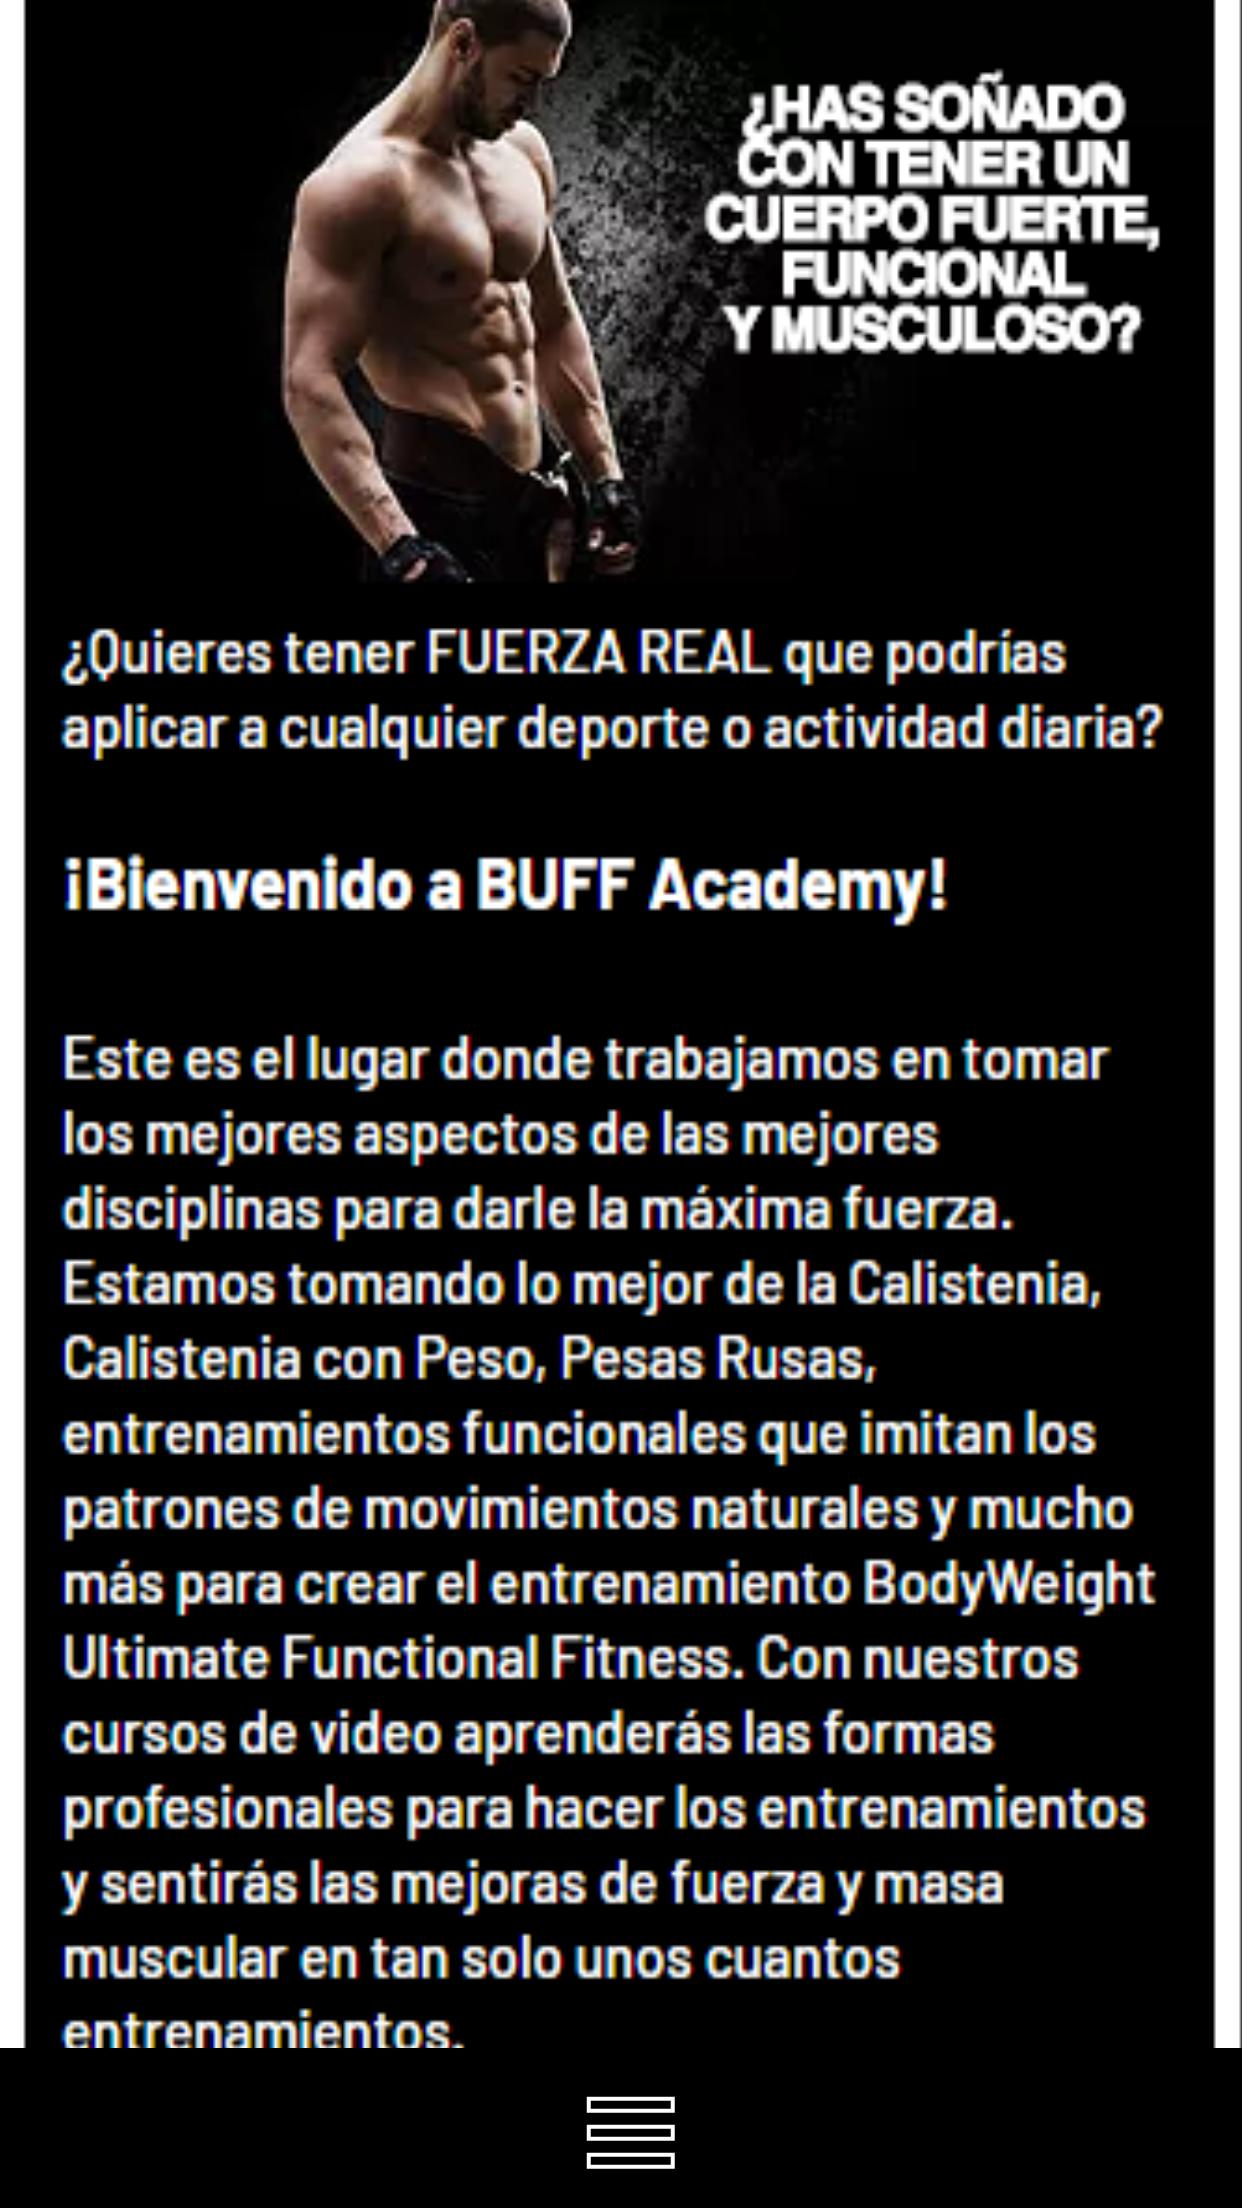 BUFF Academy for Android - APK Download